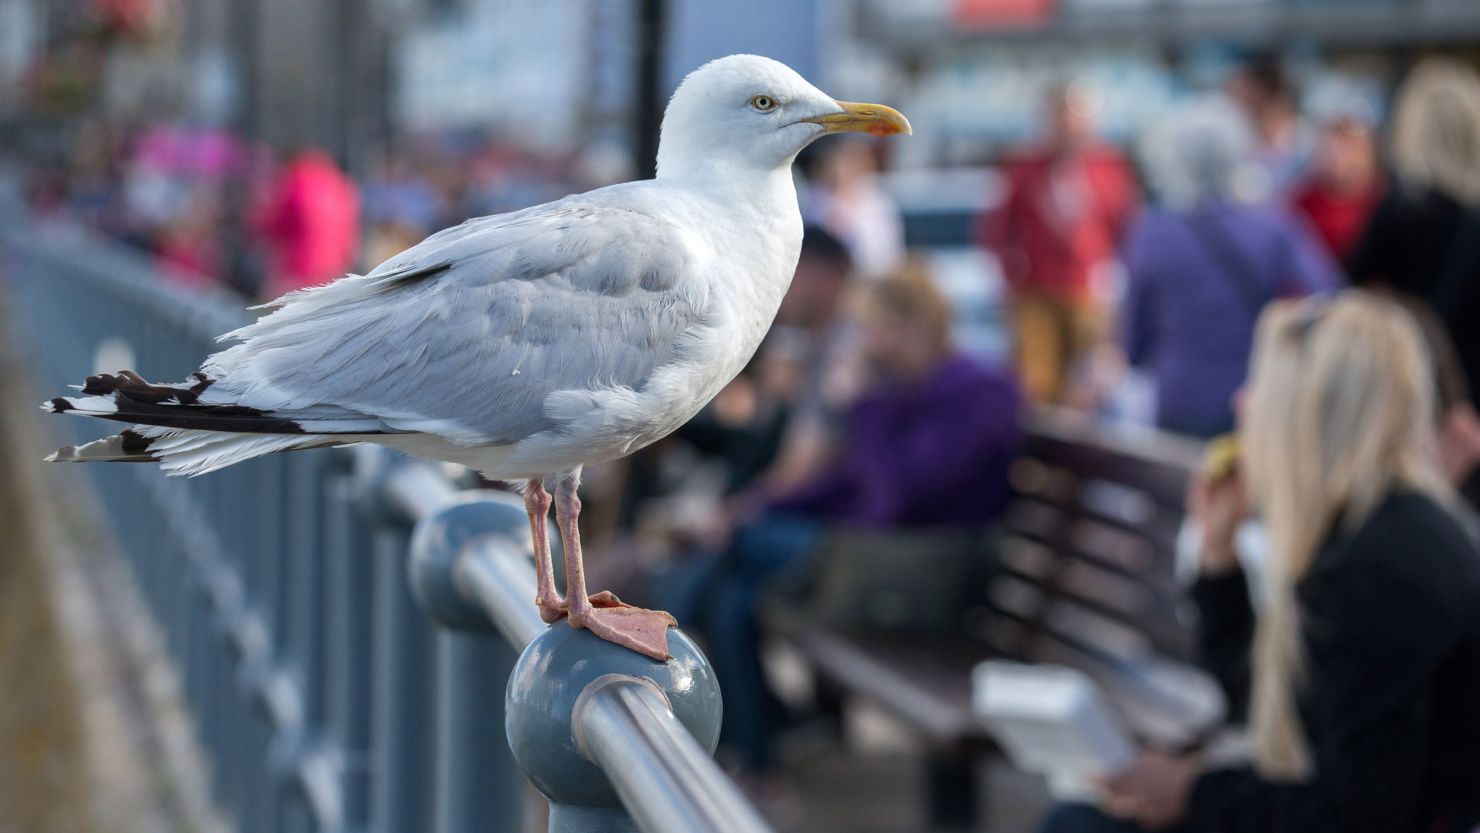 Researchers tested herring gulls in the UK as part of the study.